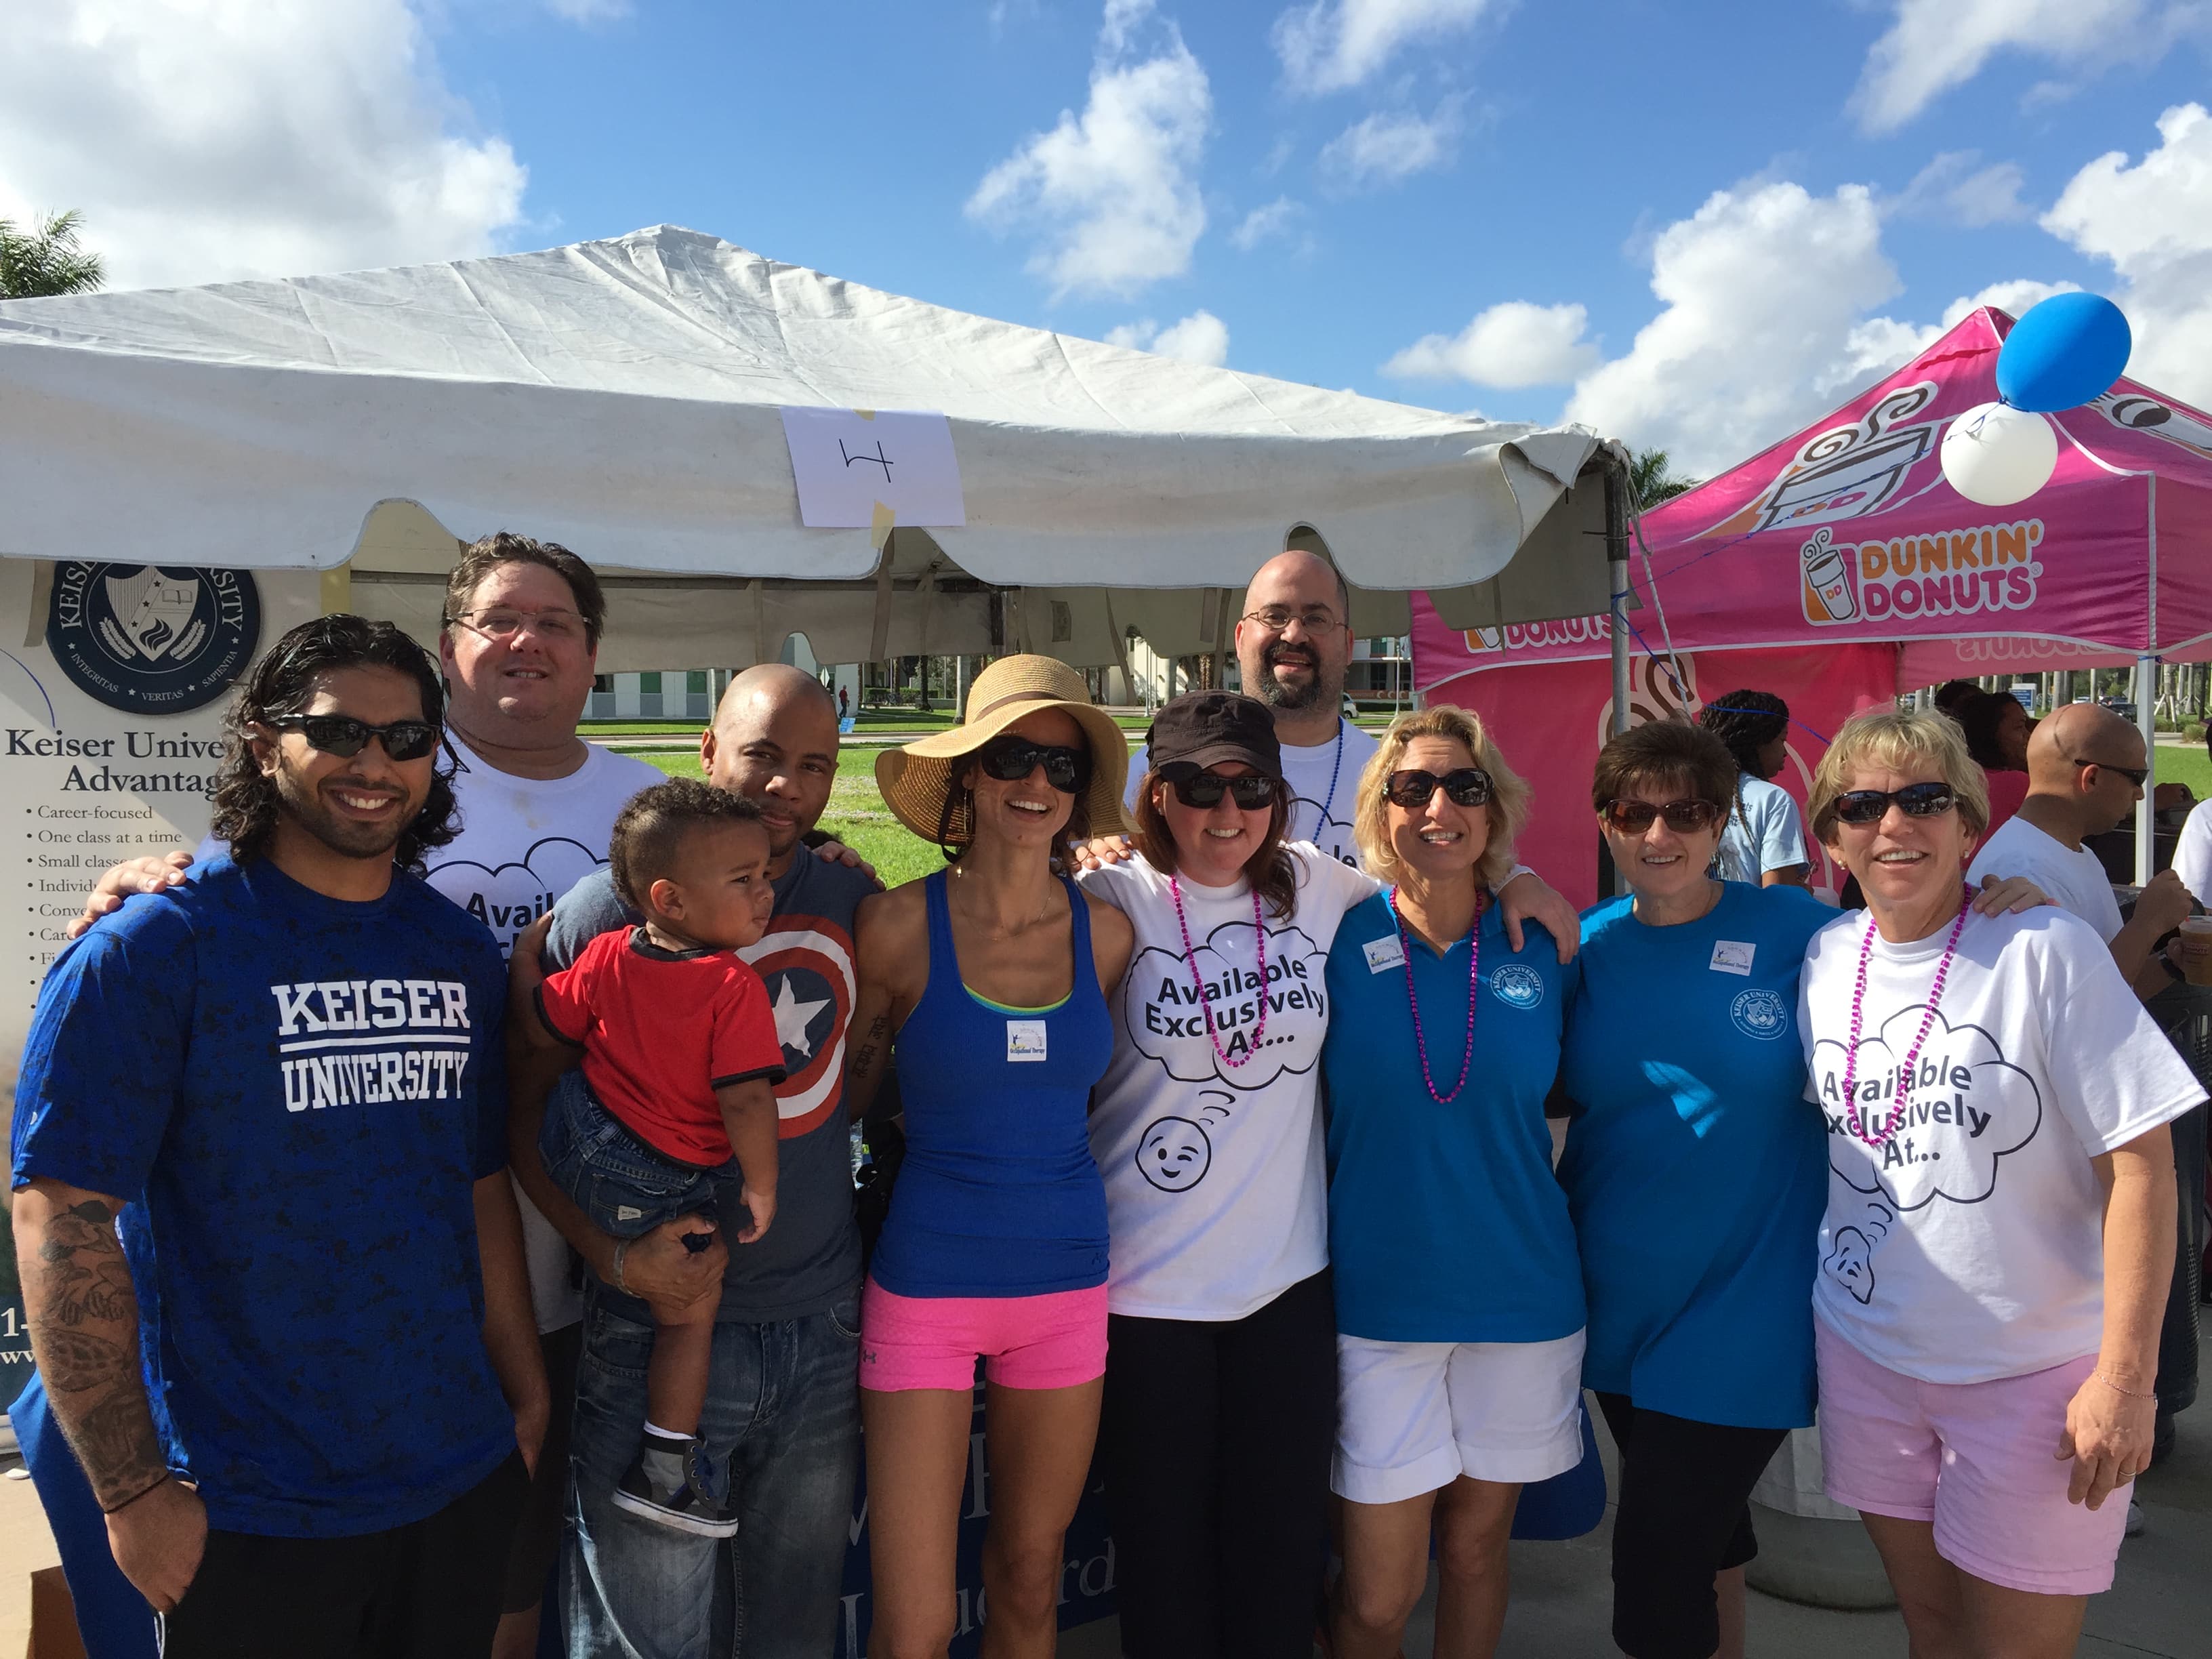 OTA and PTA Students from the Ft. Lauderdale Campus Participate in the National Parkinson’s Foundation Walk